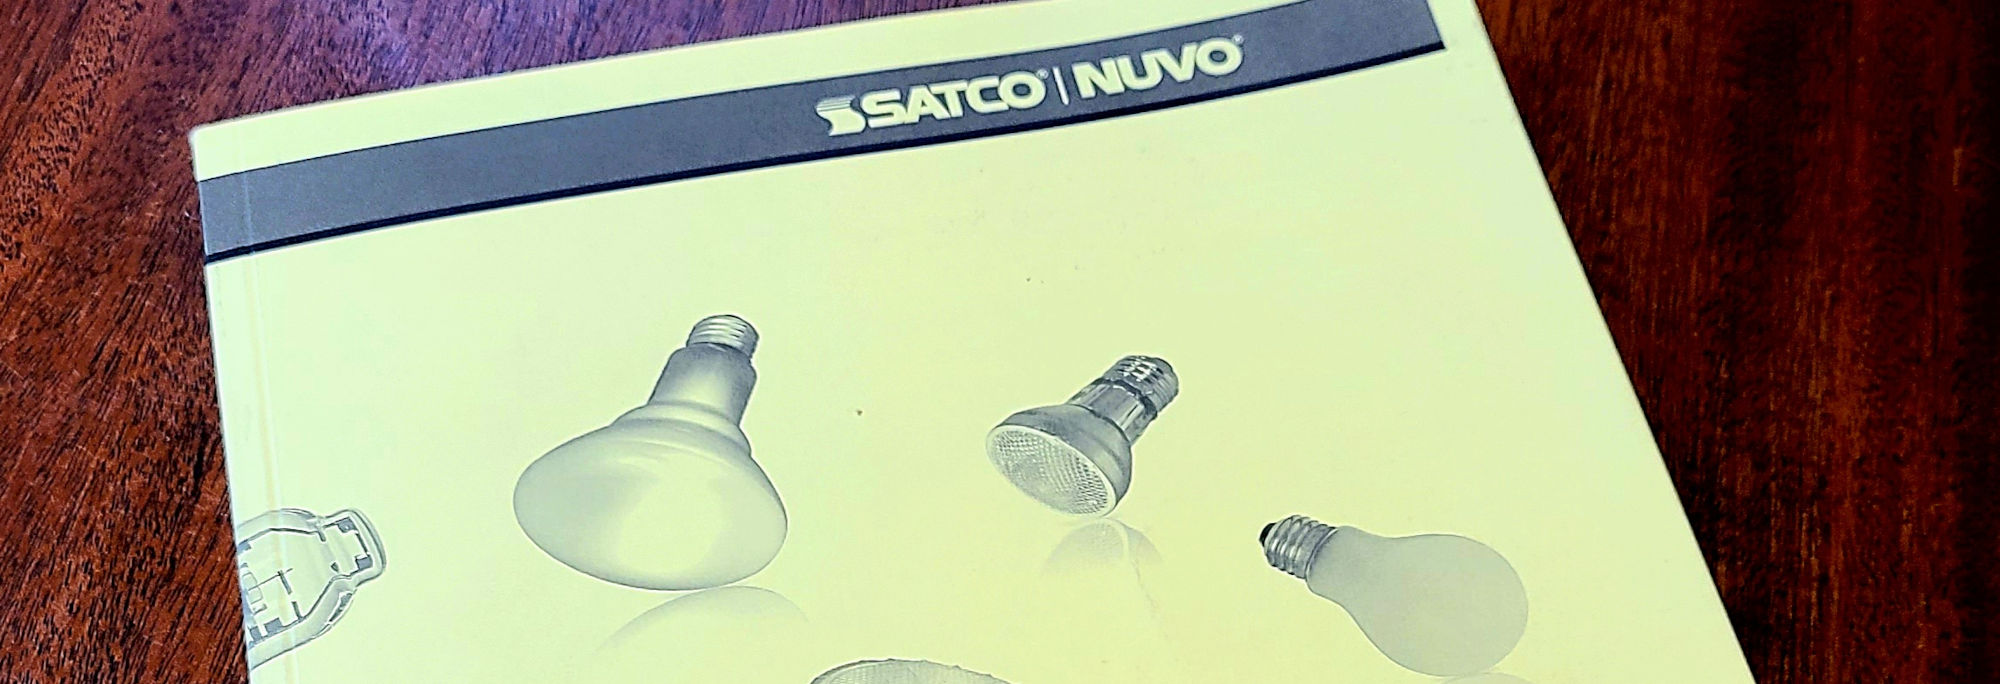 Image of a Satco Nuvo manual